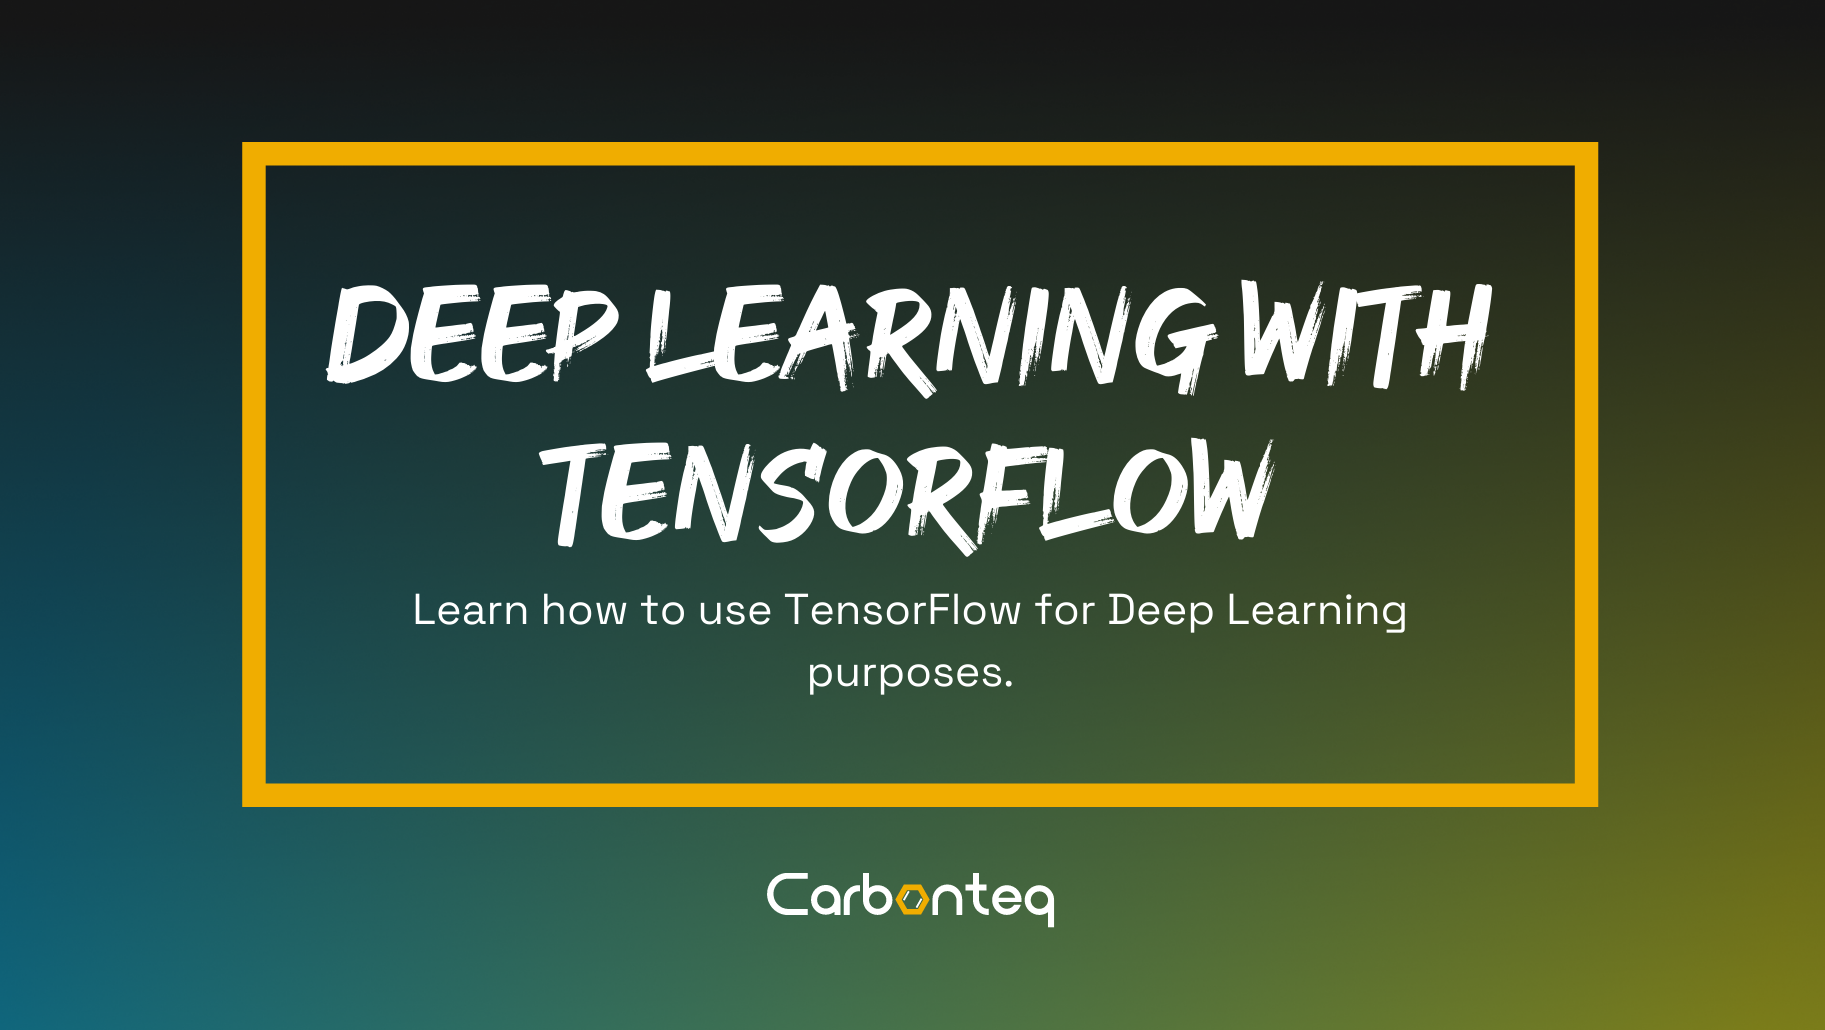 Deep Learning With TensorFlow